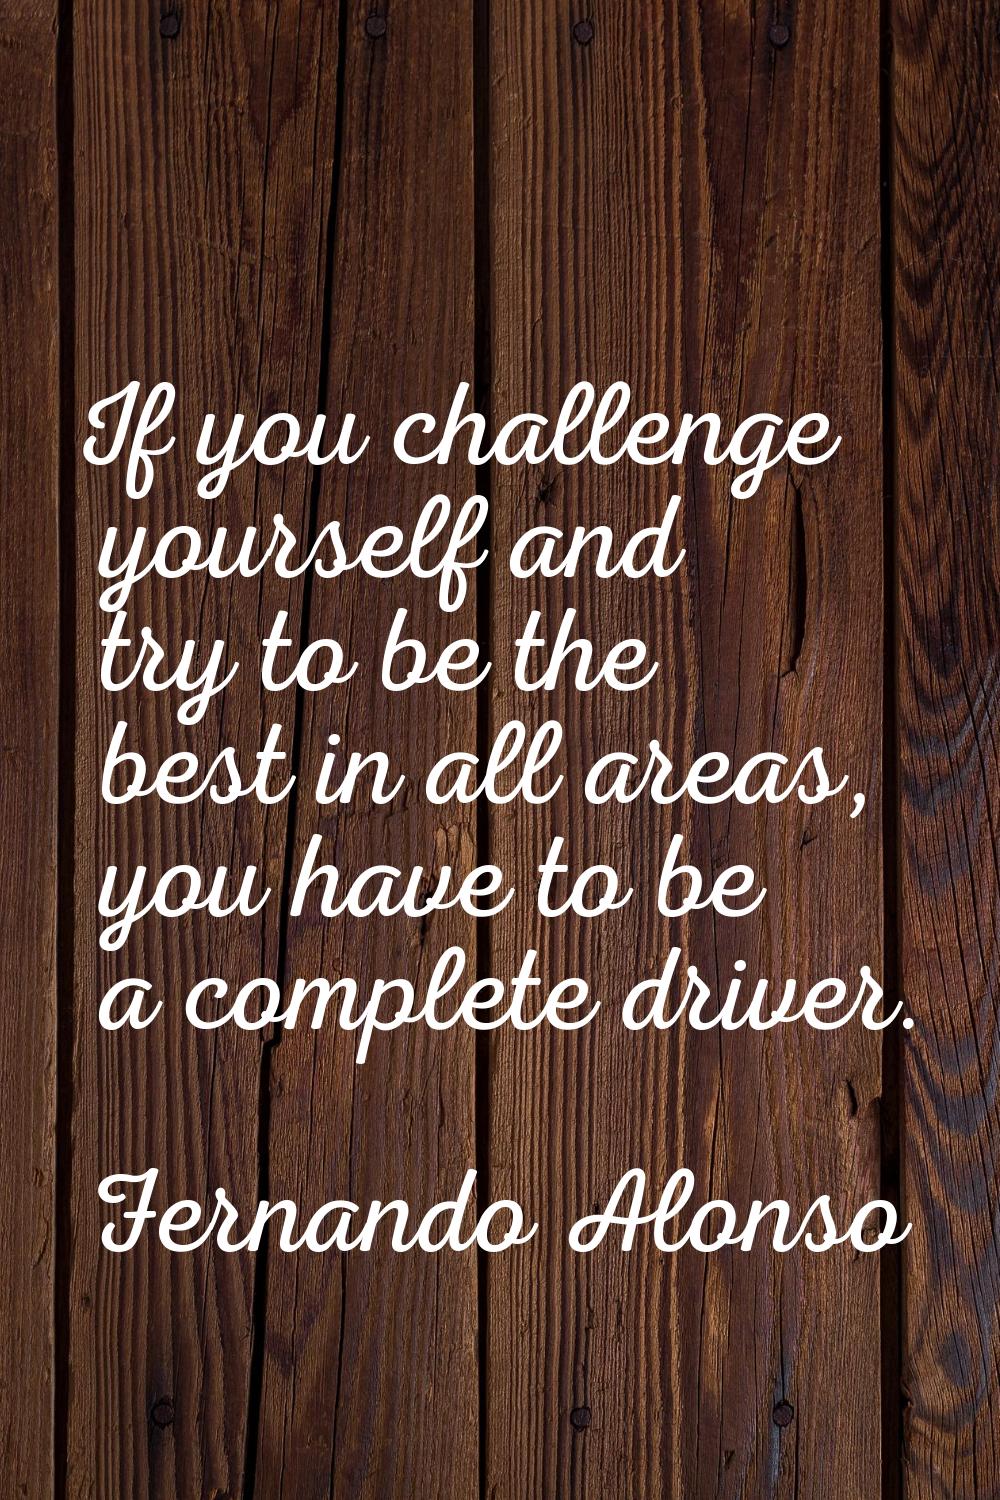 If you challenge yourself and try to be the best in all areas, you have to be a complete driver.